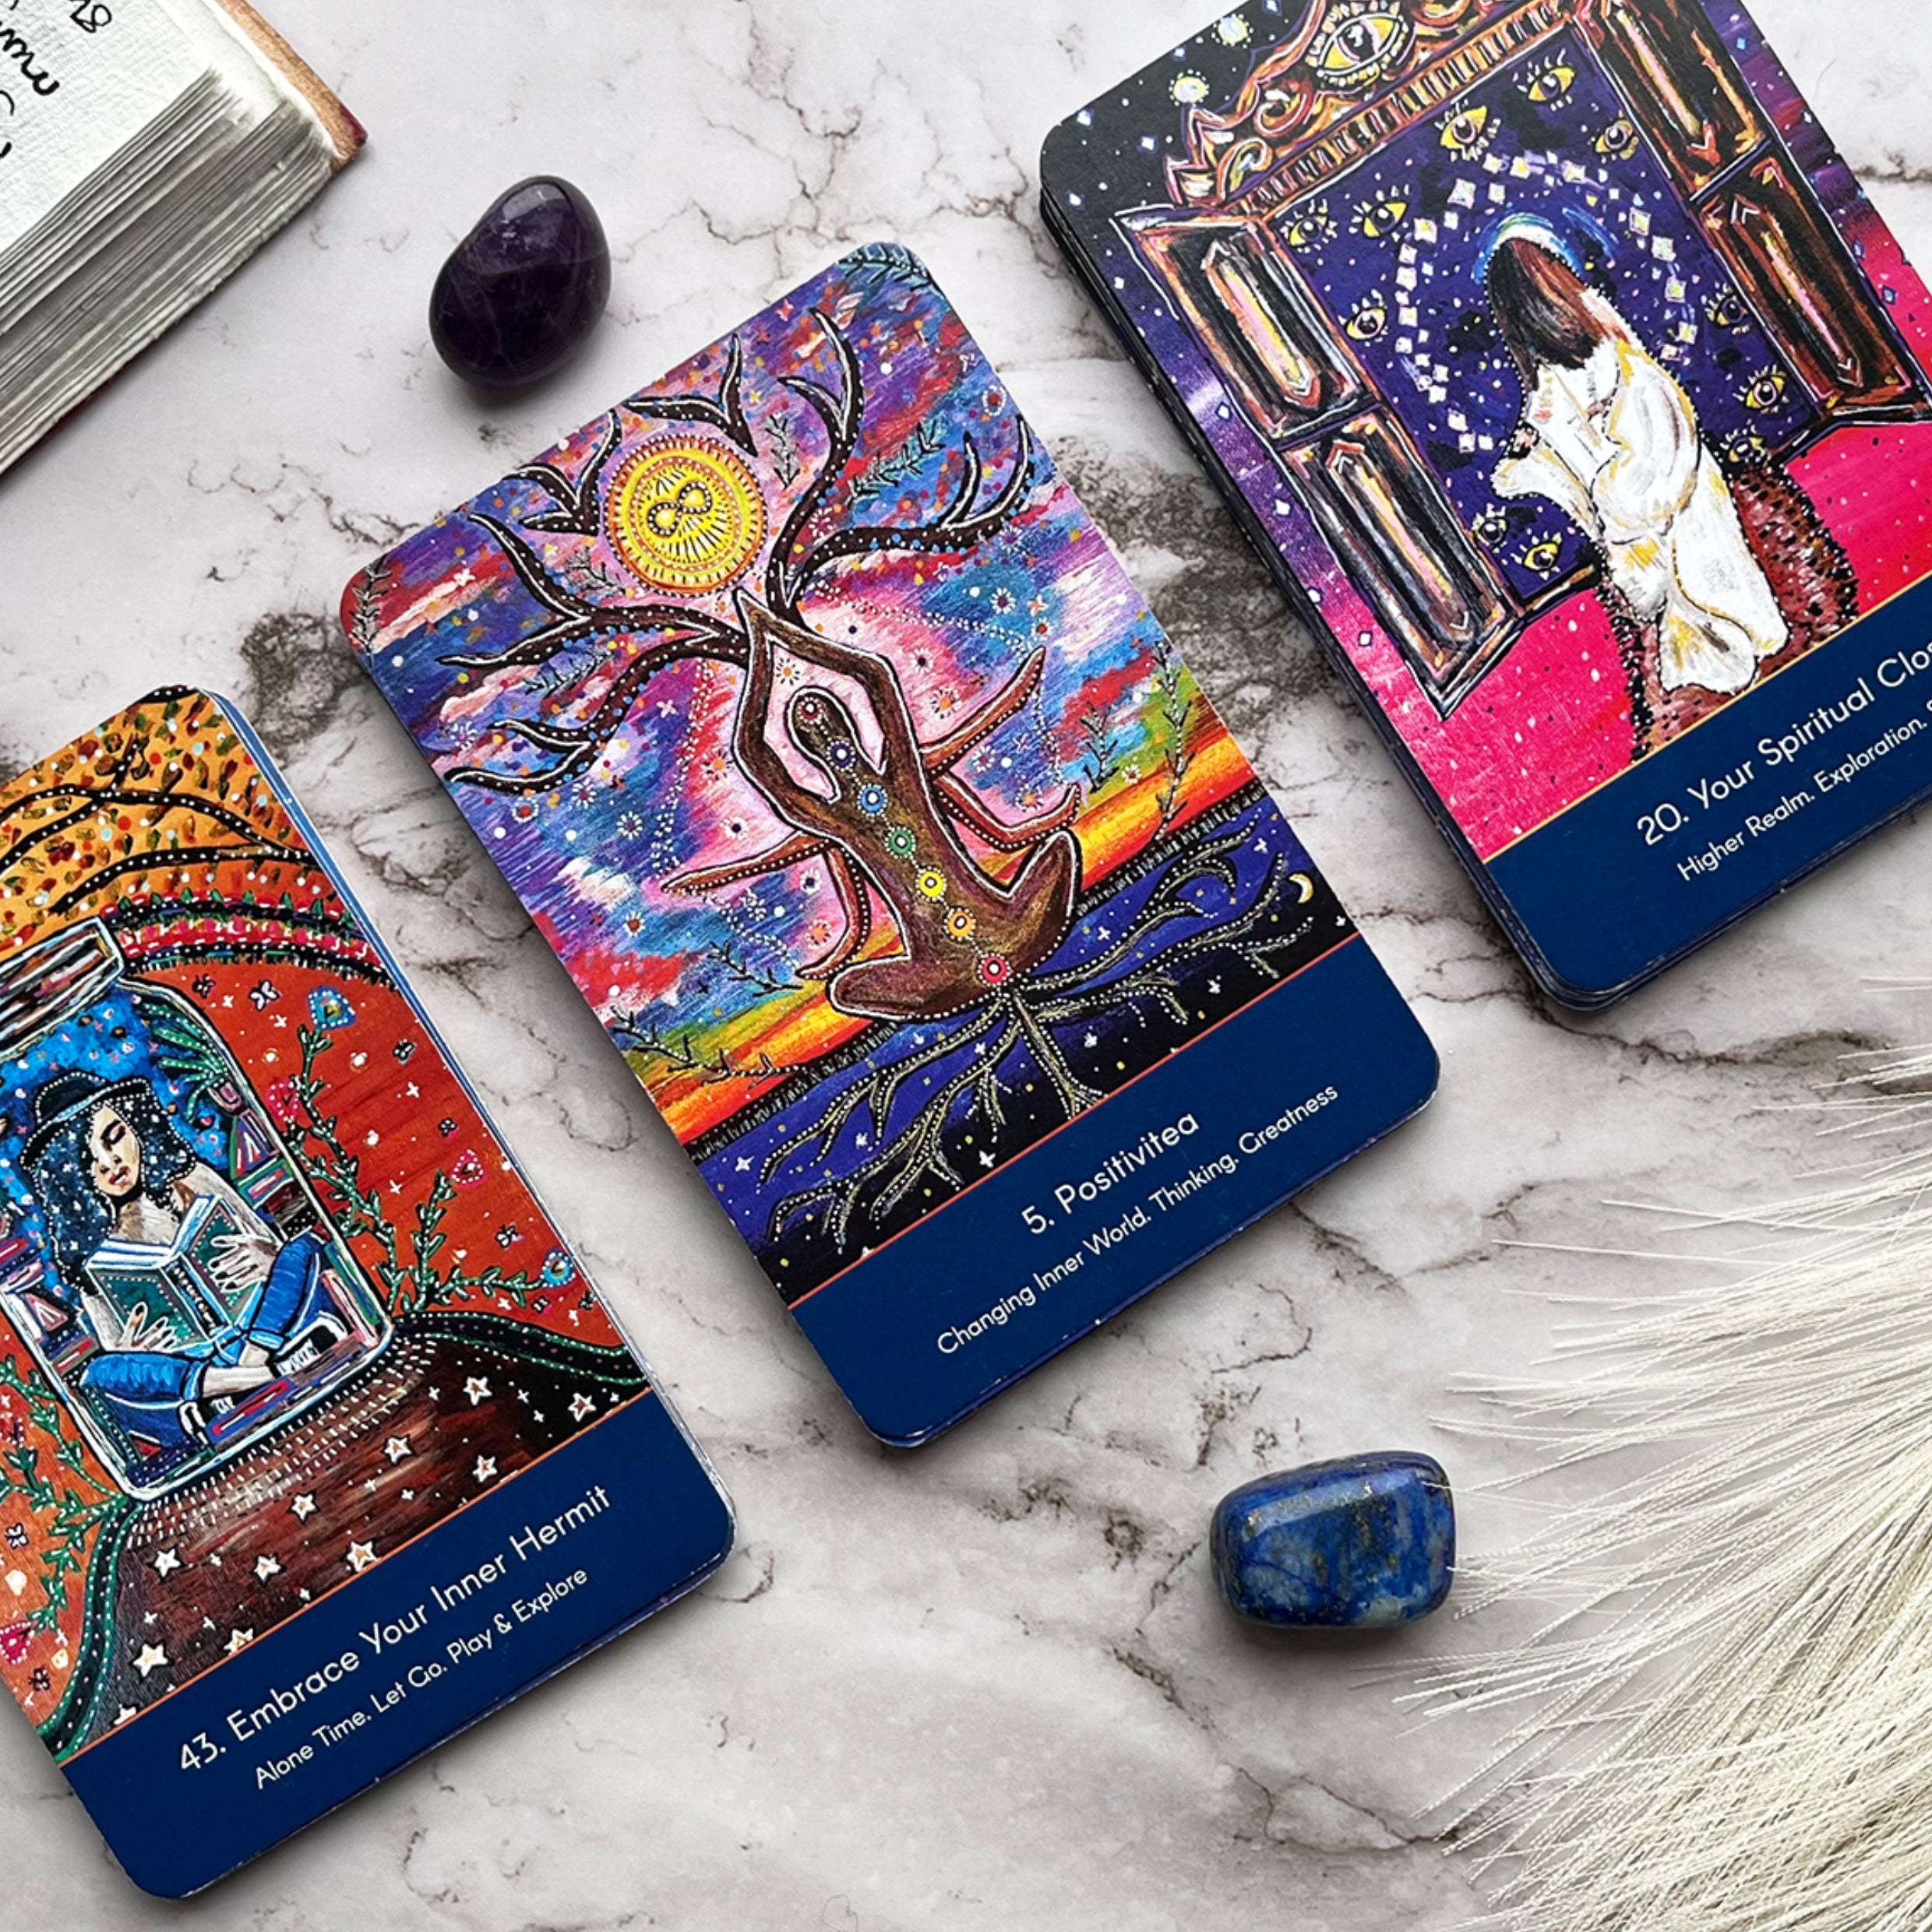 General Oracle Card Reading